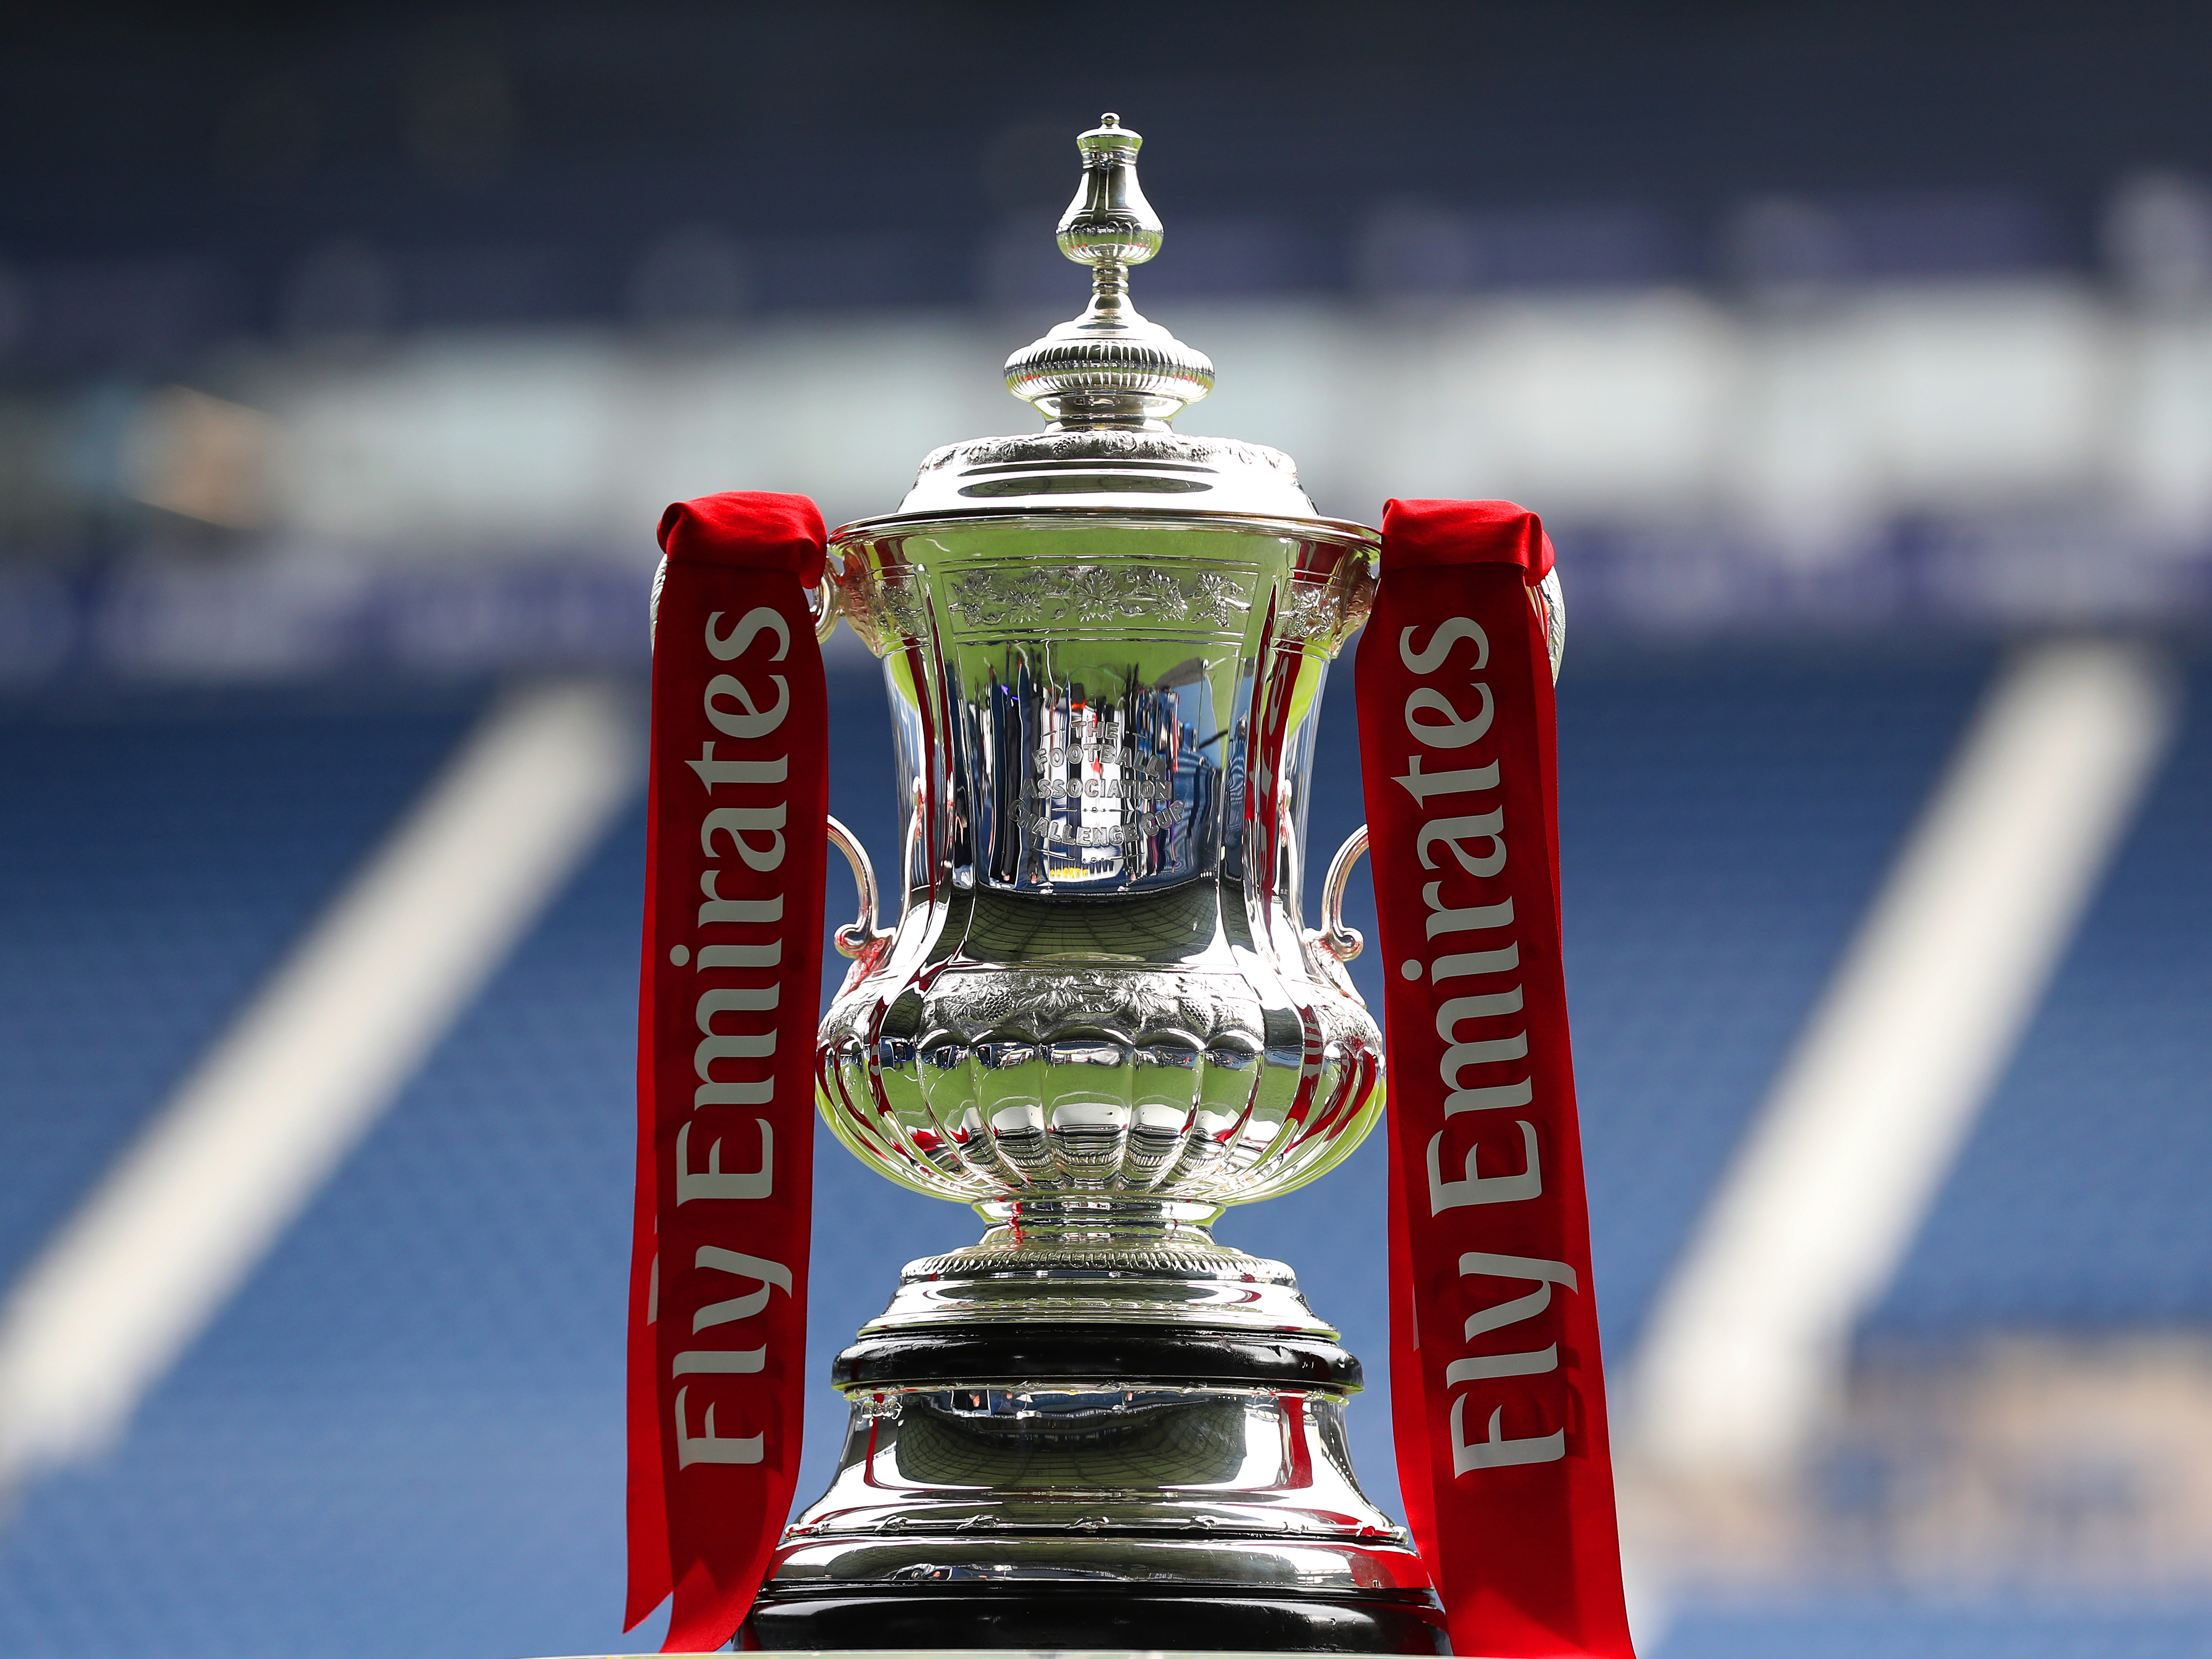 An image of the FA Cup trophy at The Hawthorns